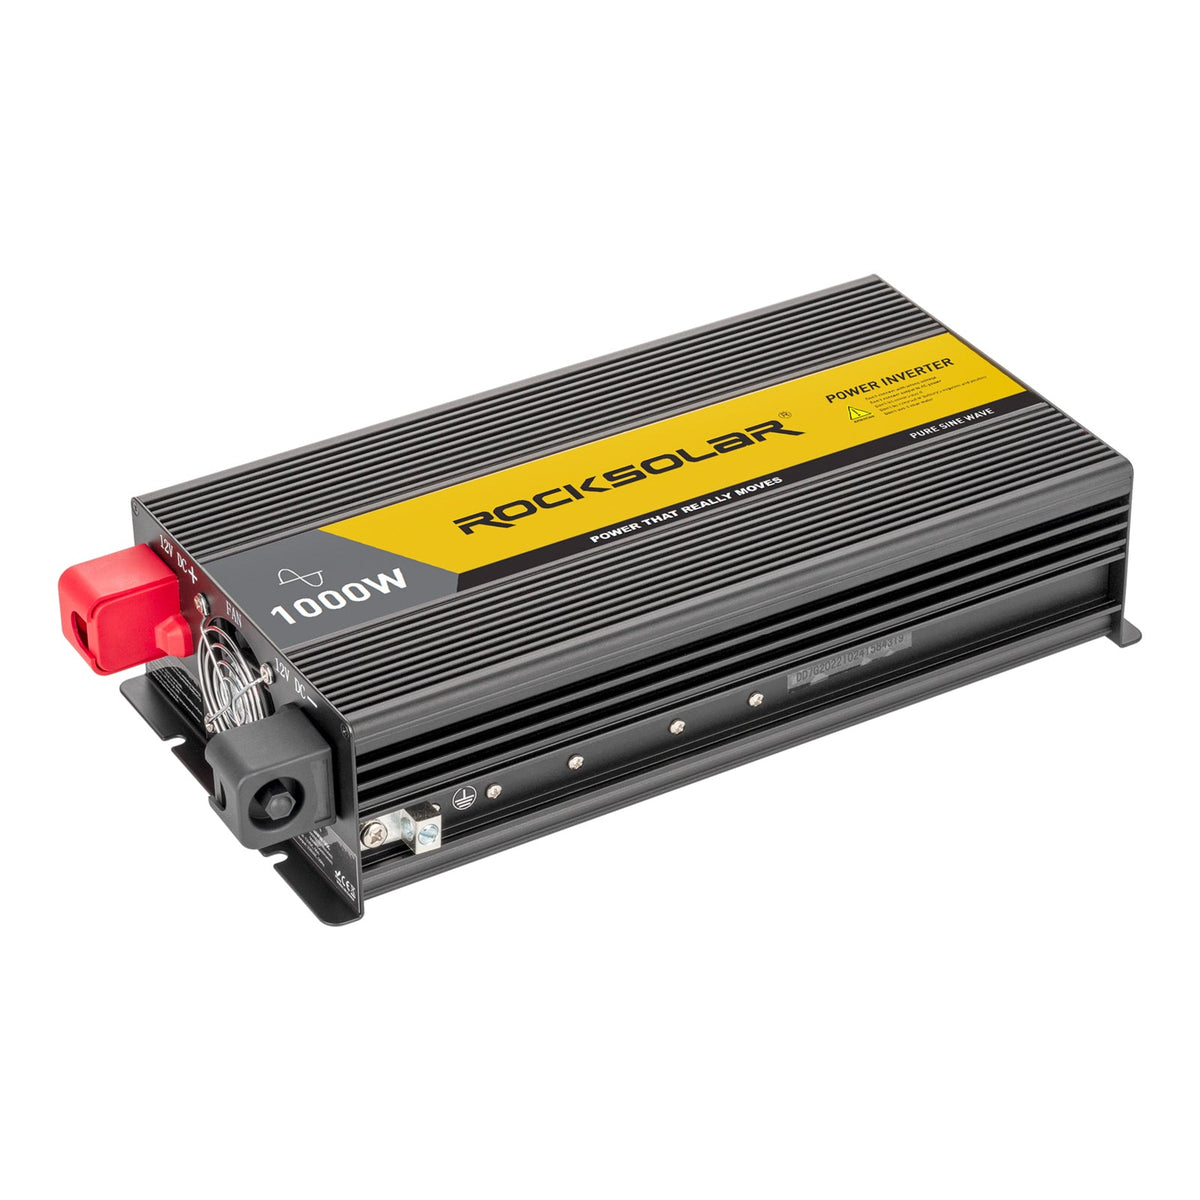 Compact 12 Volt 1000W Pure Sine Wave Inverter with Digital Display | Effortless Power at Your Fingertips – ROCKSOLAR